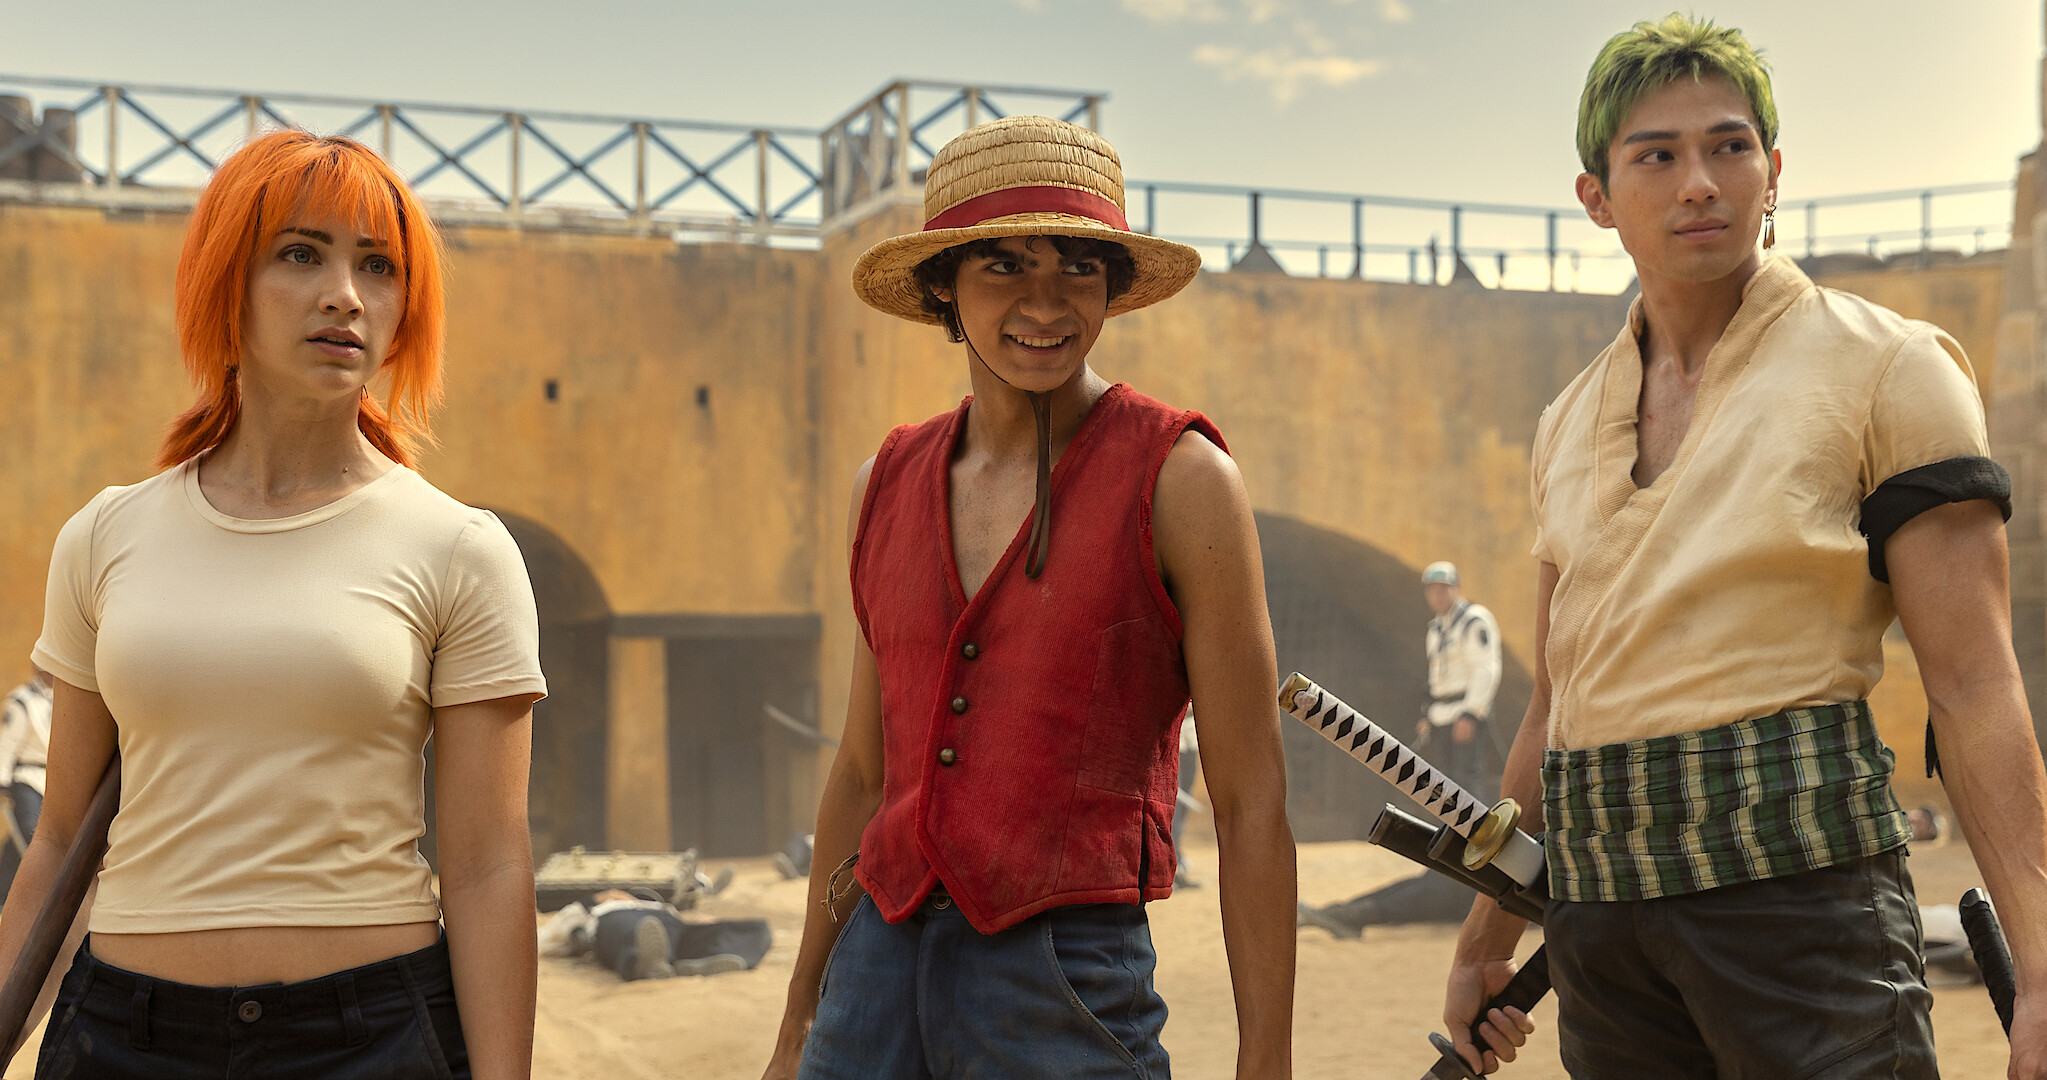 Meet the Cast of the ONE PIECE Live Action Series on Netflix